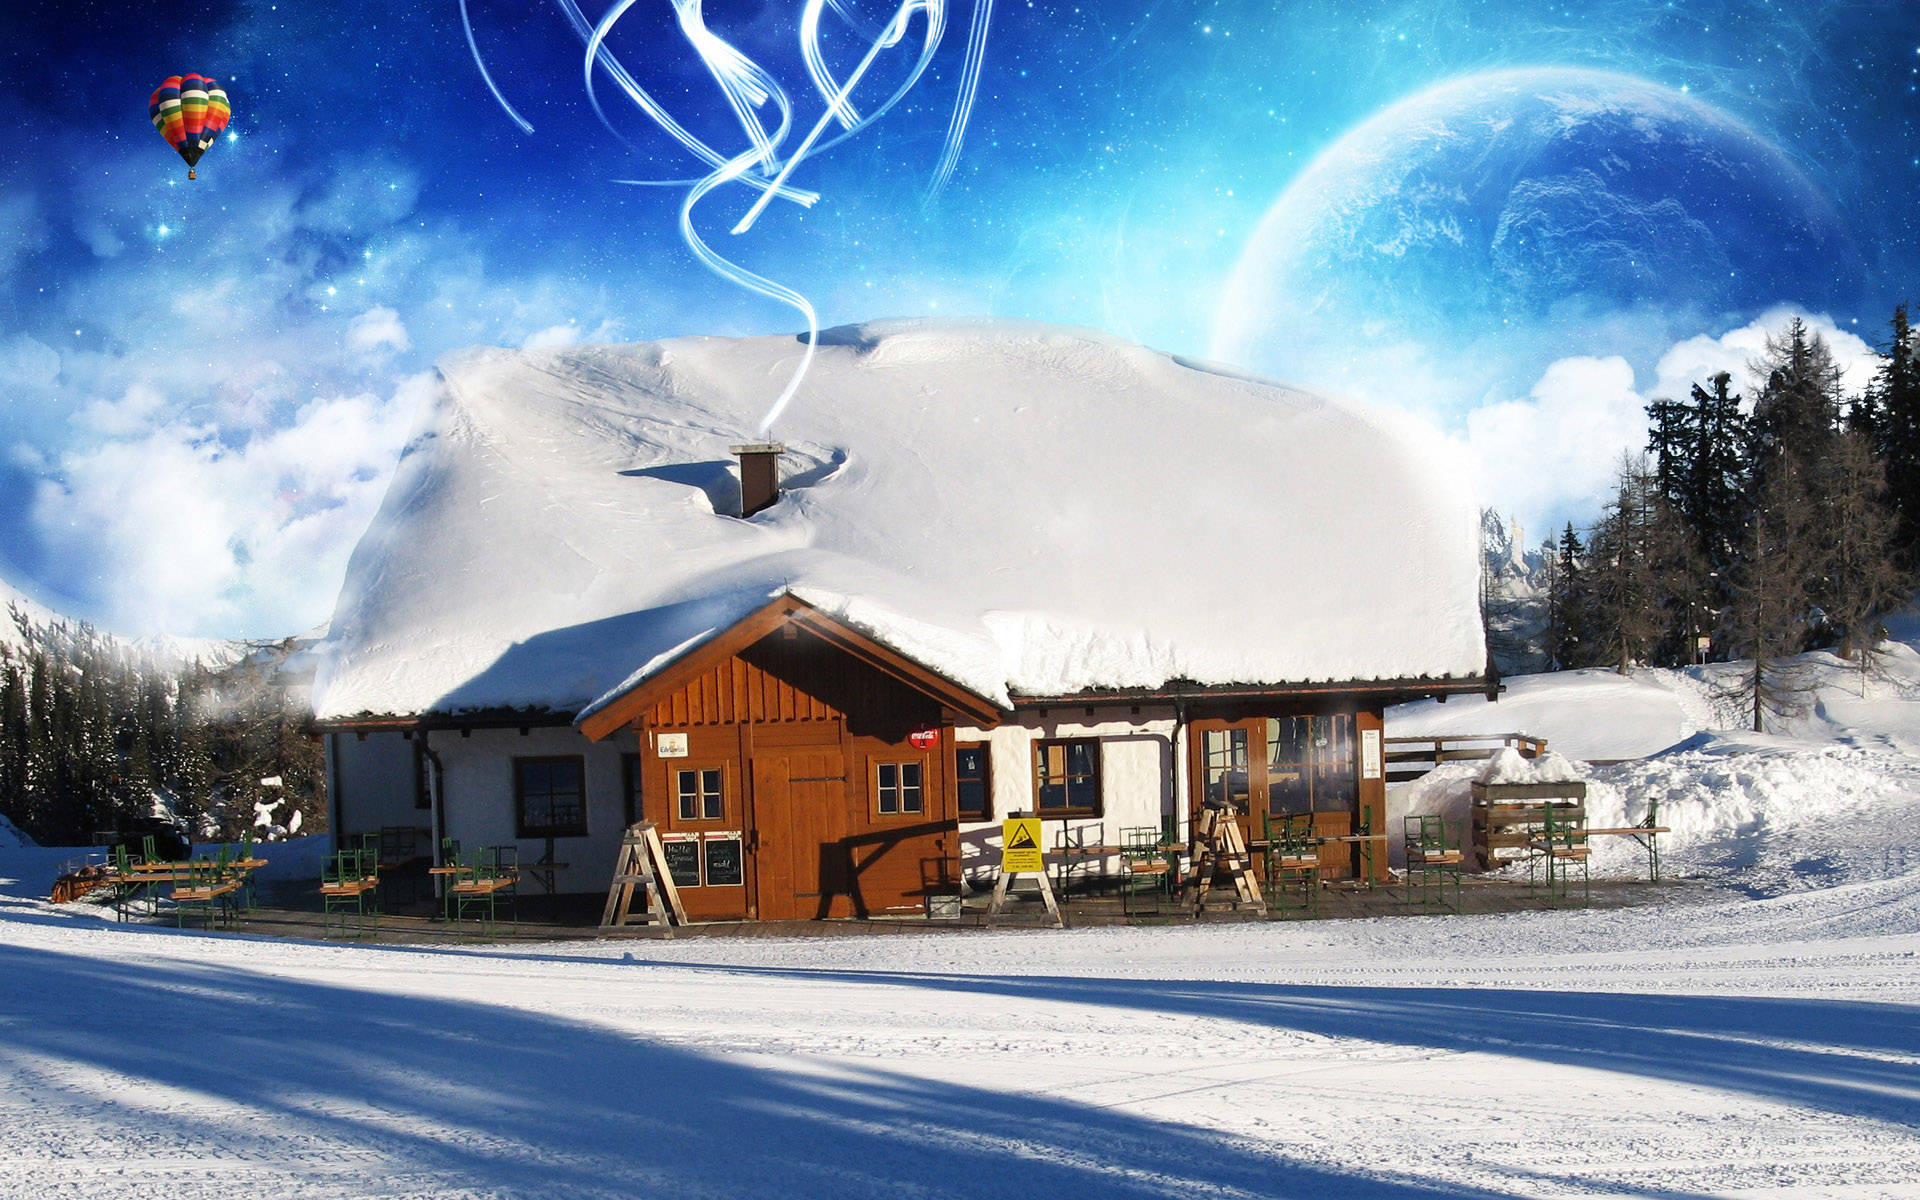 Caption: Cozy Winter Cabin - Home Sweet Home Background